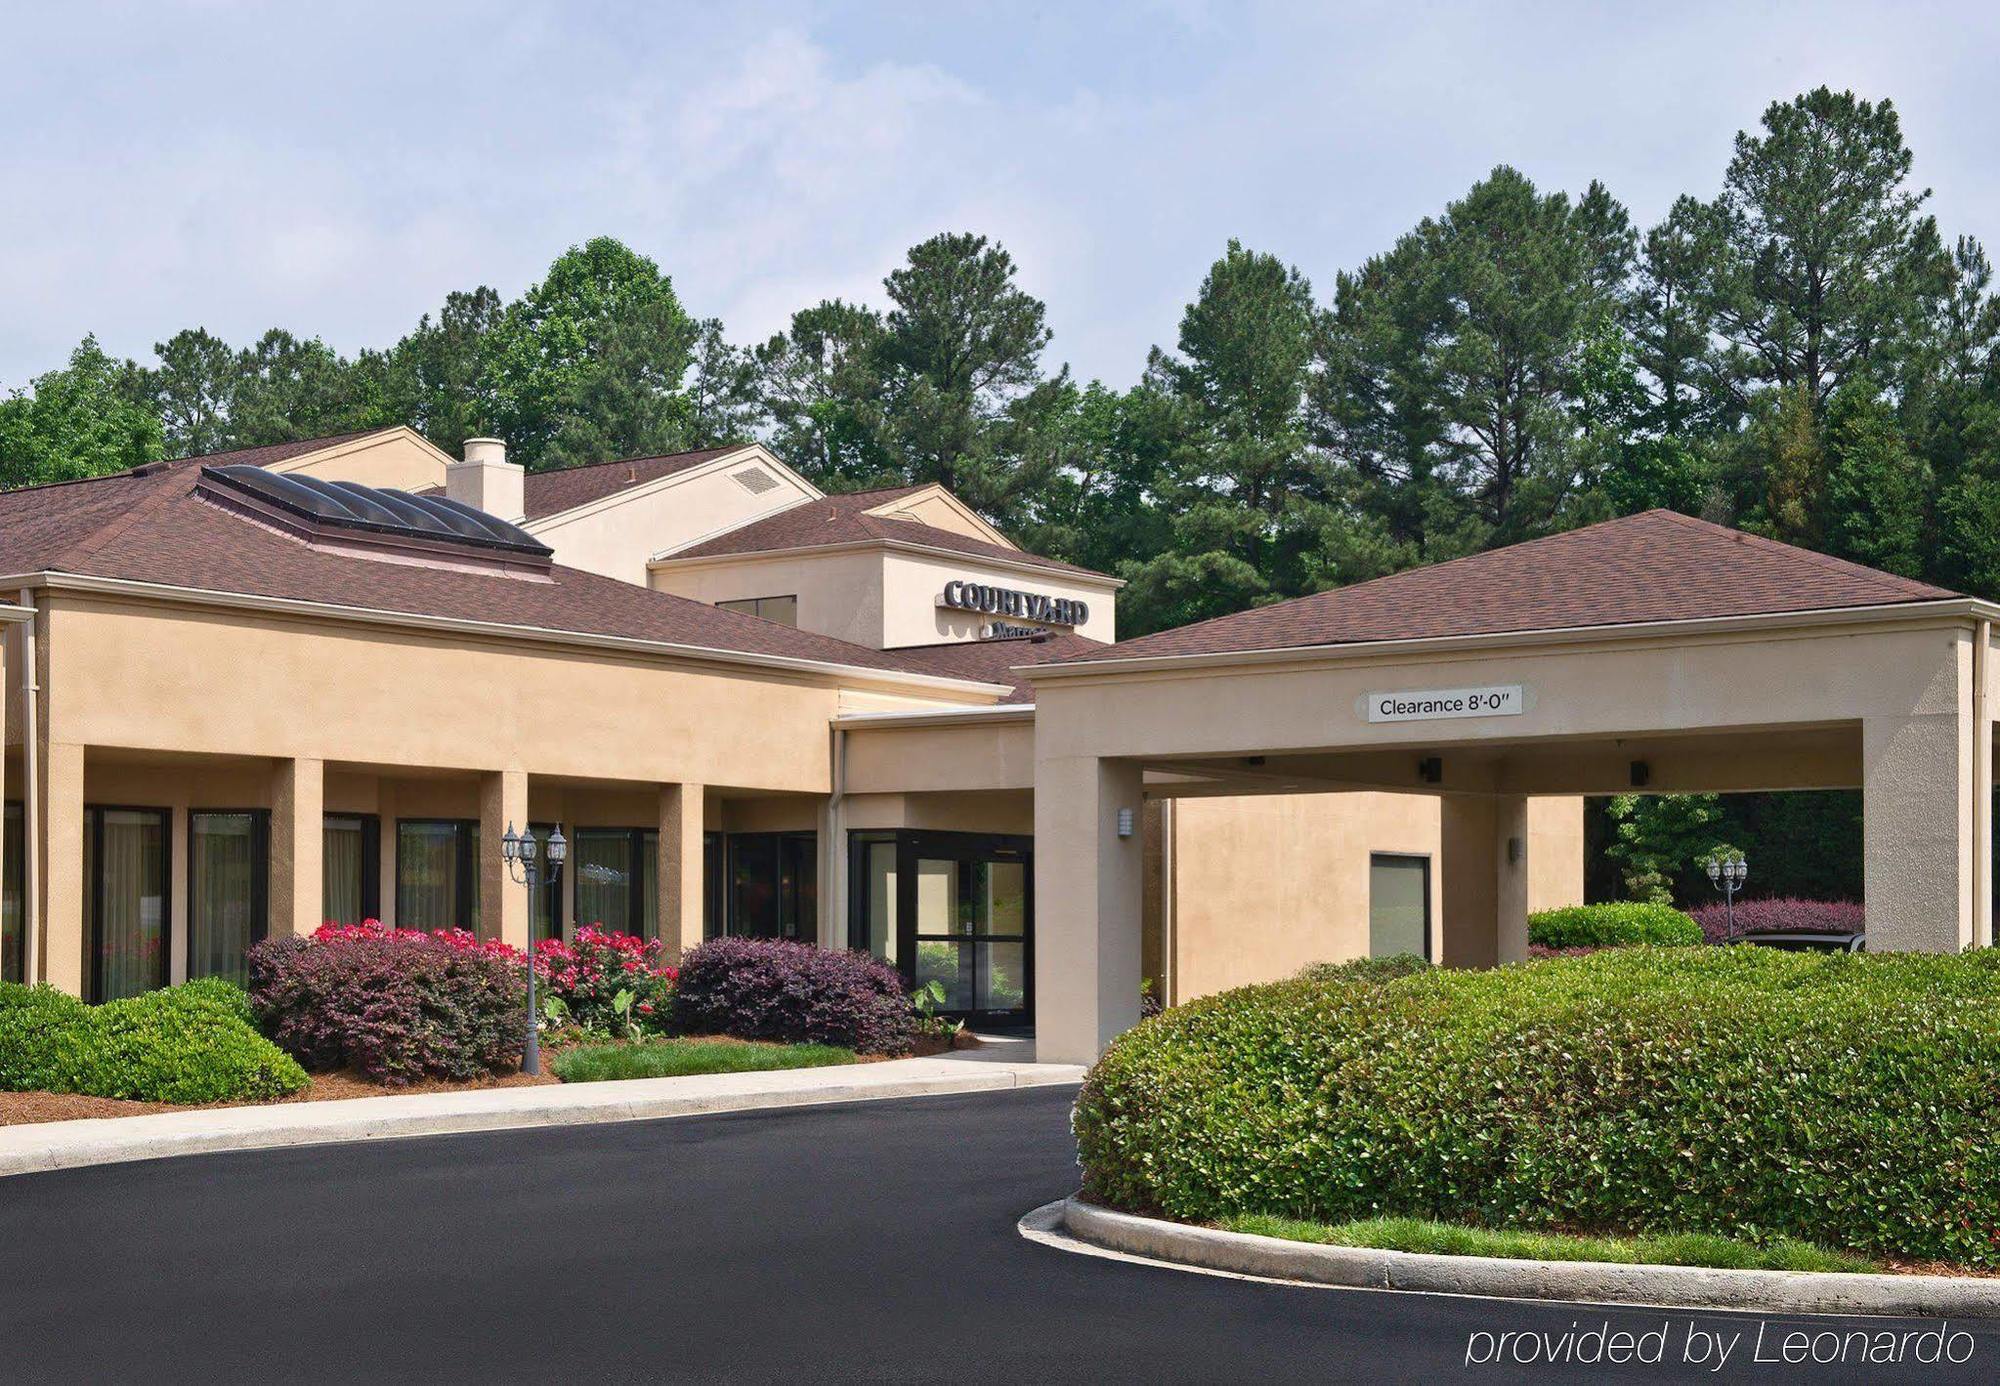 Courtyard By Marriott Raleigh Cary Hotel Buitenkant foto